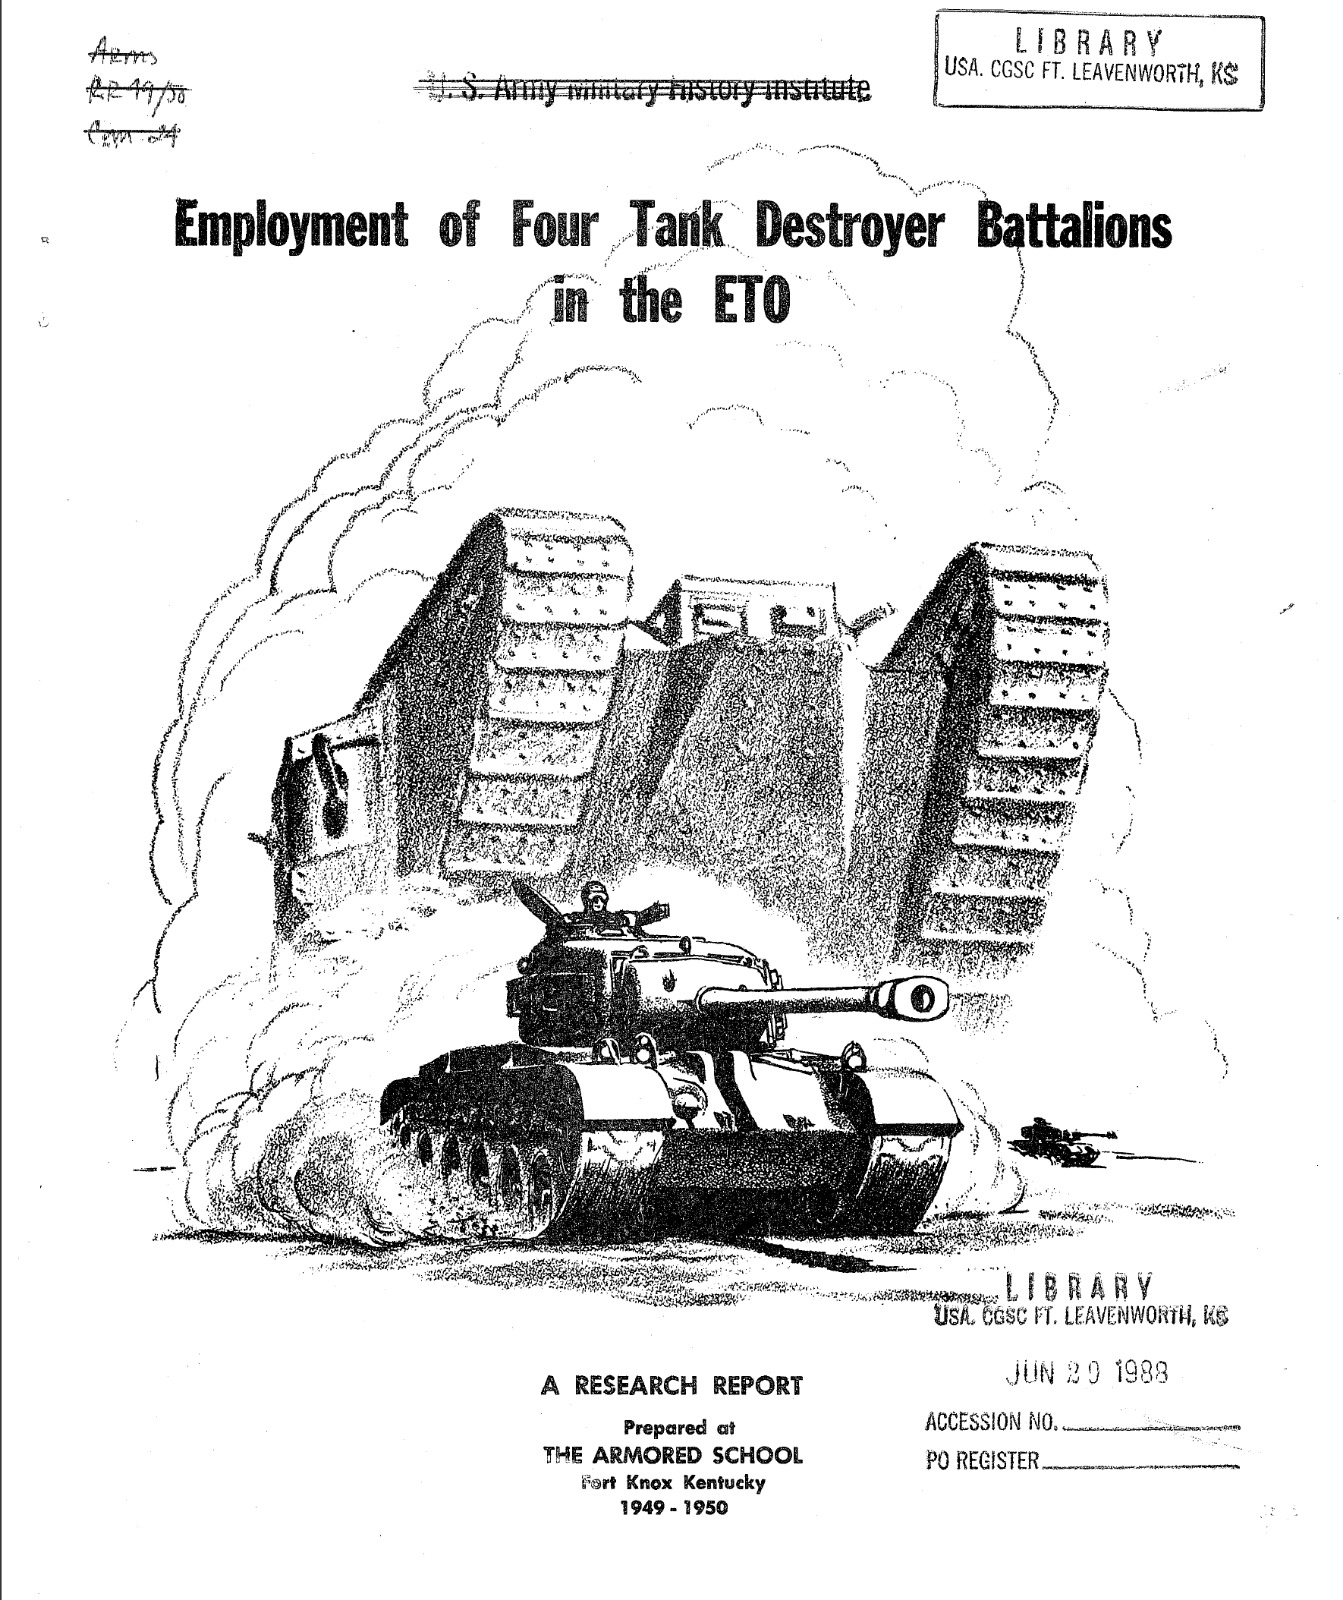 188 Page 1950 Employment Of Four Tank Destroyer Battalions In The ETO on Data CD